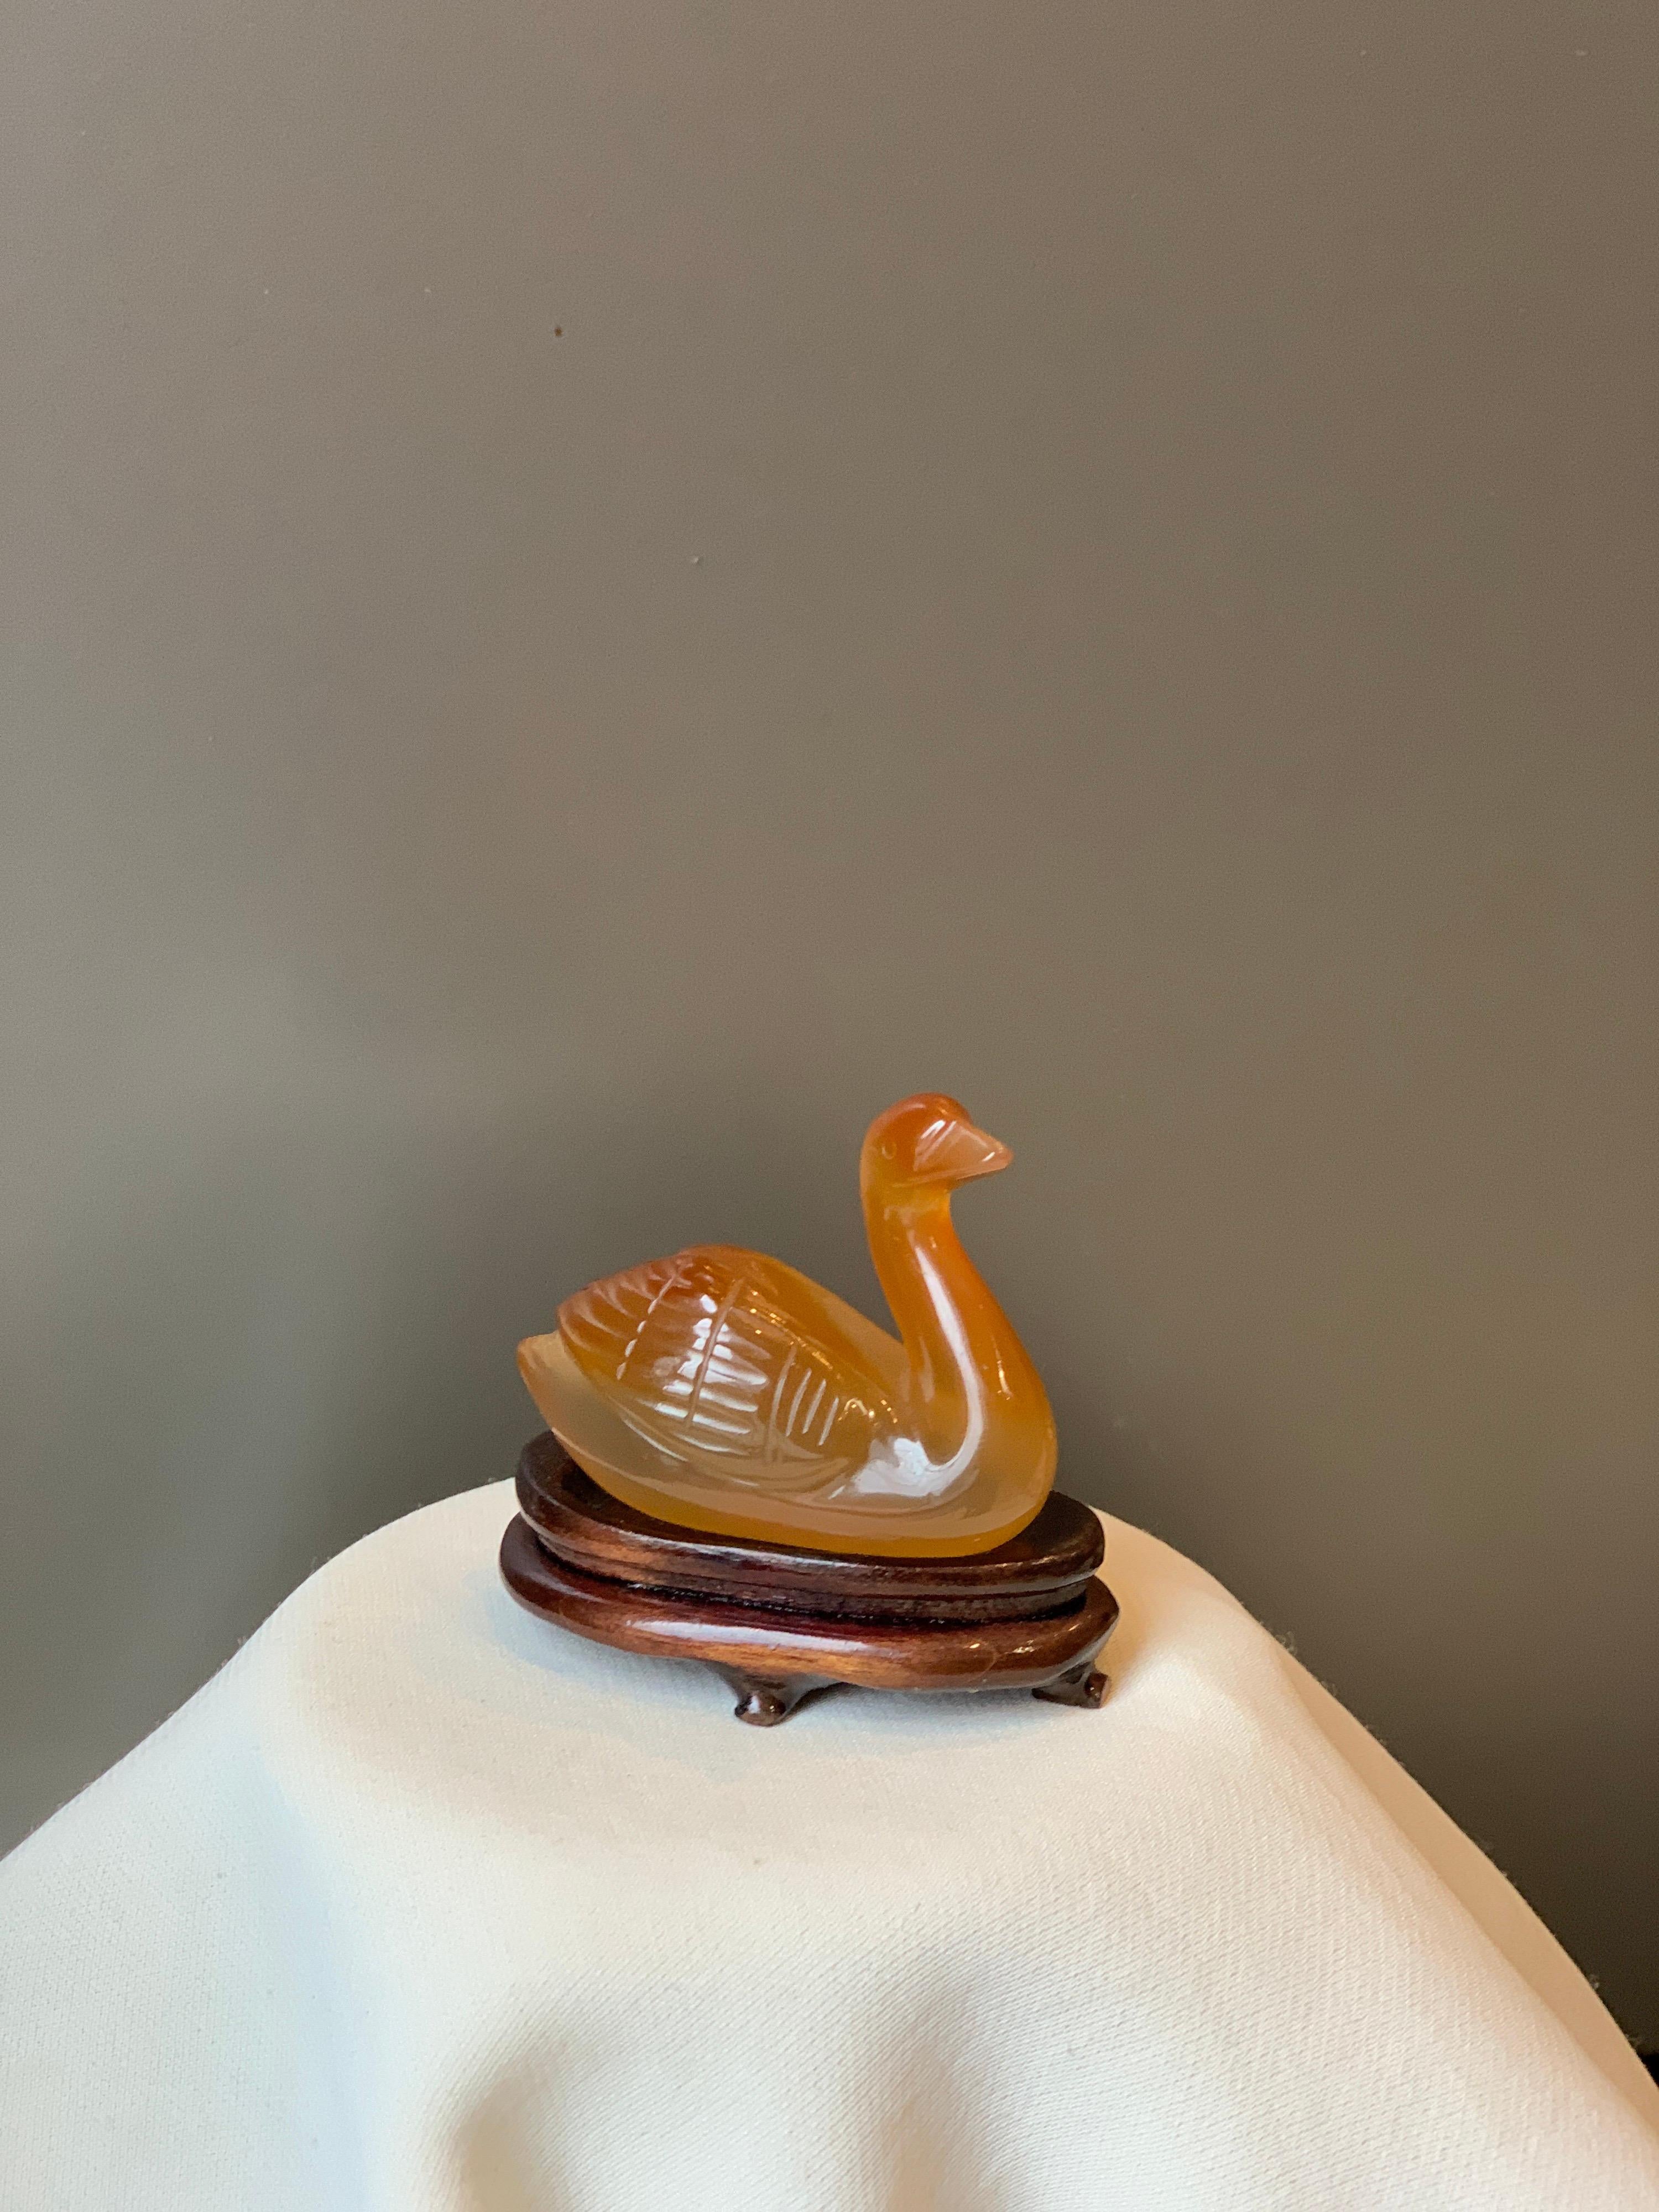 Small Amber Chinese decorative swan on a wooden stand.